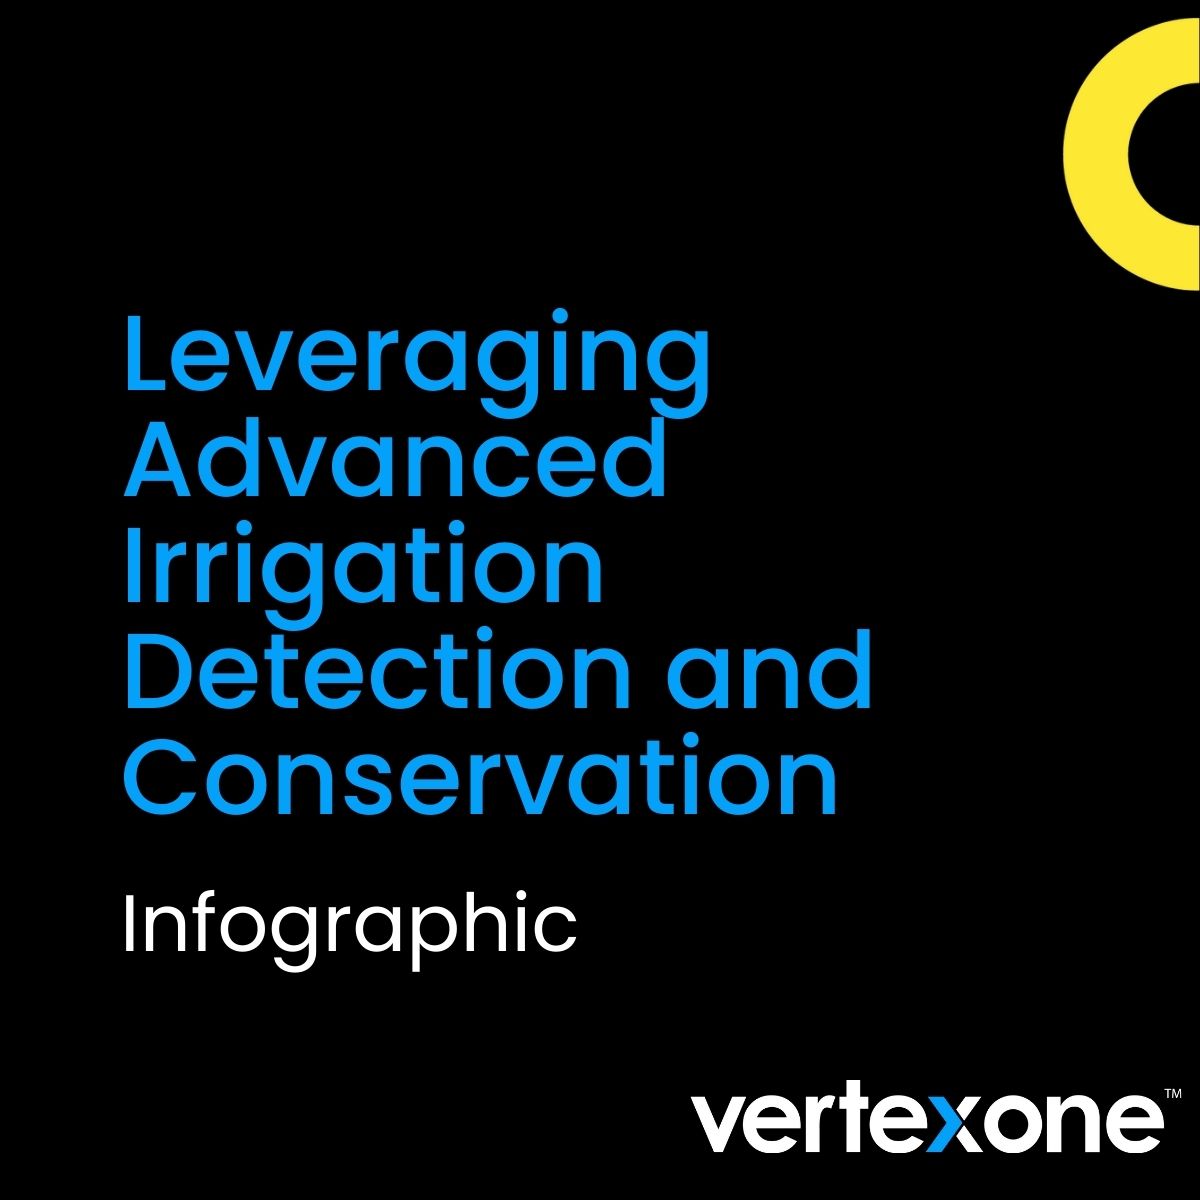 Leveraging Advanced Irrigation Detection and Conservation - Infographic